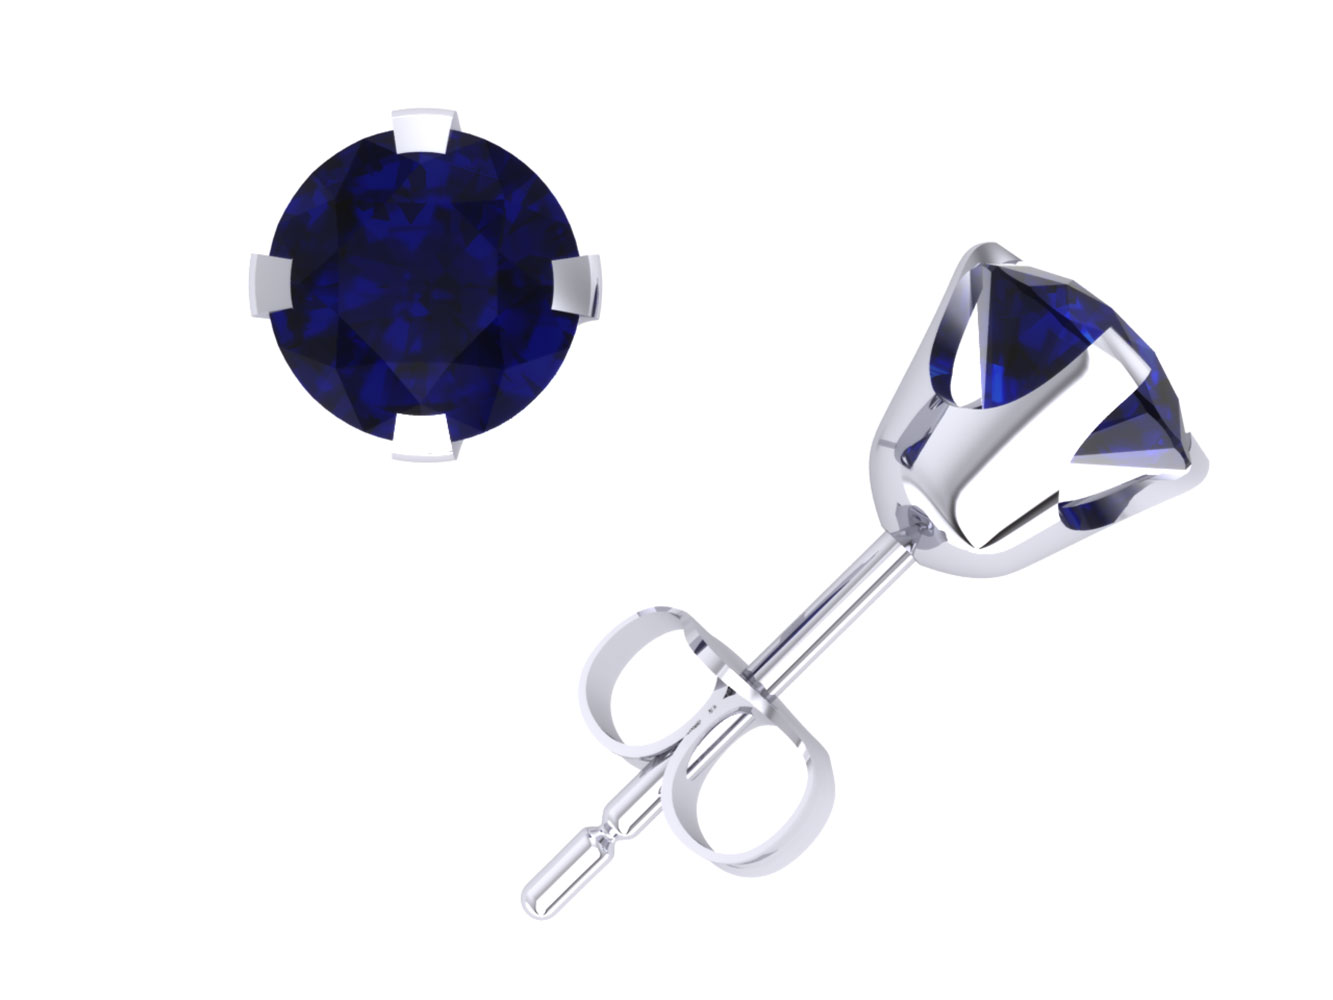 Jewel We Sell Real 1.00Ct Round Cut Blue Sapphire Stud Earrings 18k White or Yellow Gold Prong Set AAAA